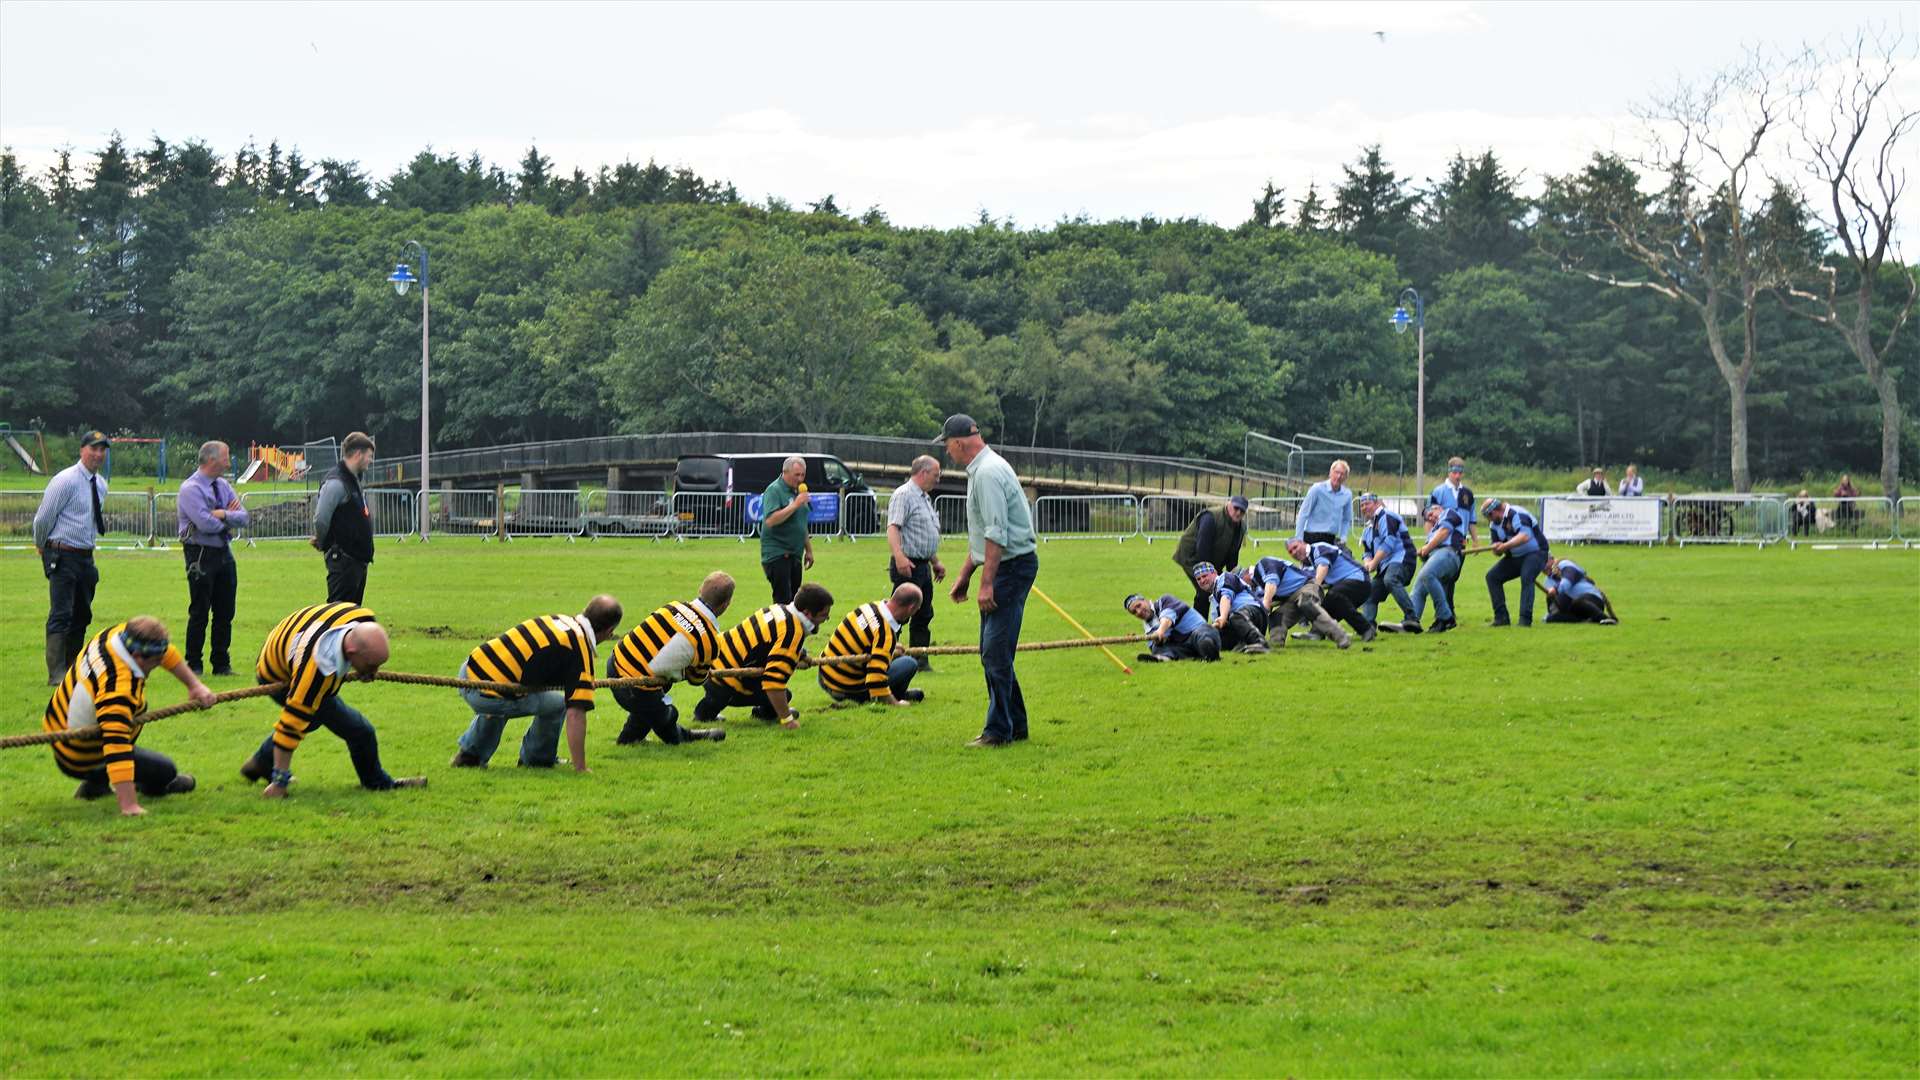 The tug of war competition. Picture: DGS